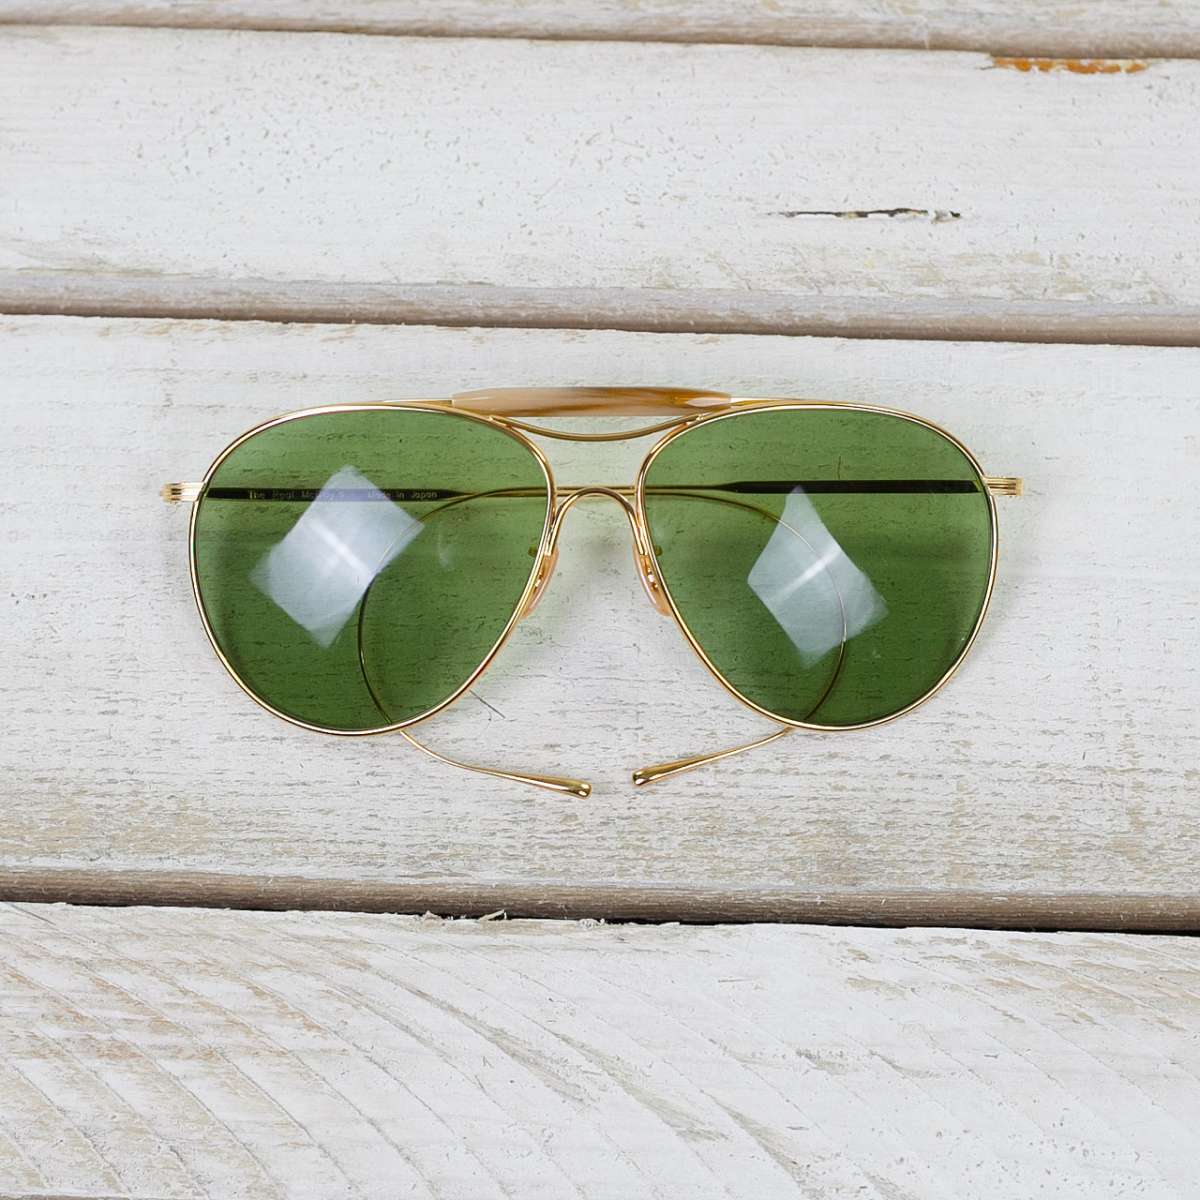 The Real McCoy's Aviator Sunglasses - Gold